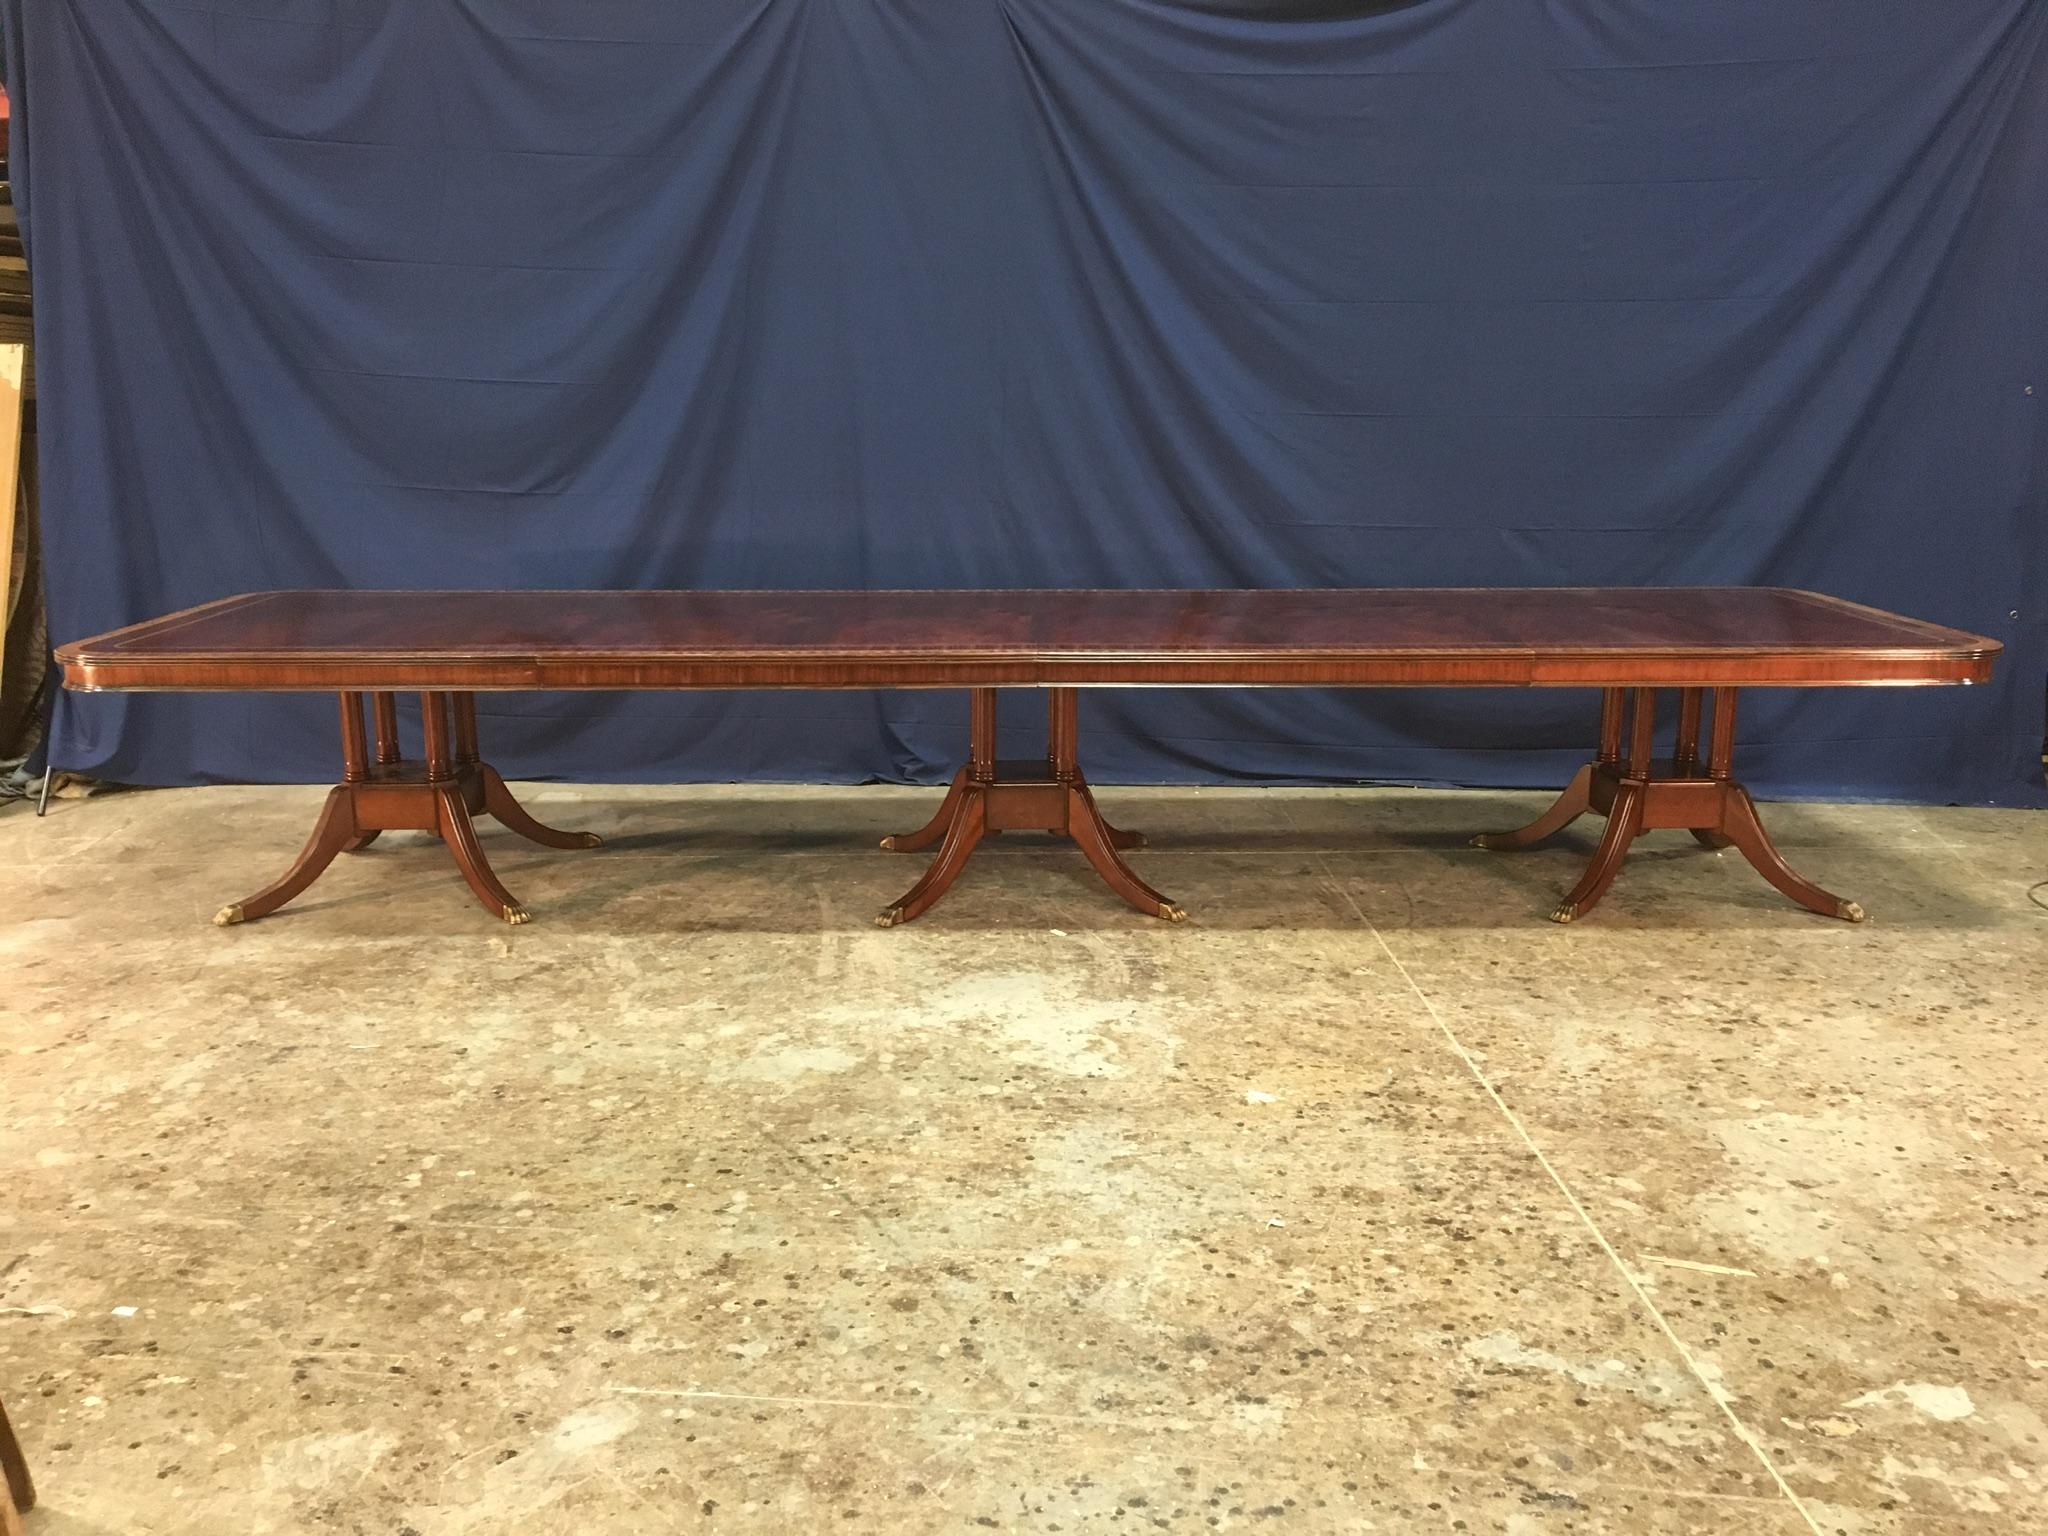 This is a made-to-order large traditional mahogany banquet/dining table made in the Leighton Hall shop. It features a field of slip-matched swirly crotch mahogany from west Africa and satinwood and santos rosewood borders from South America. It has